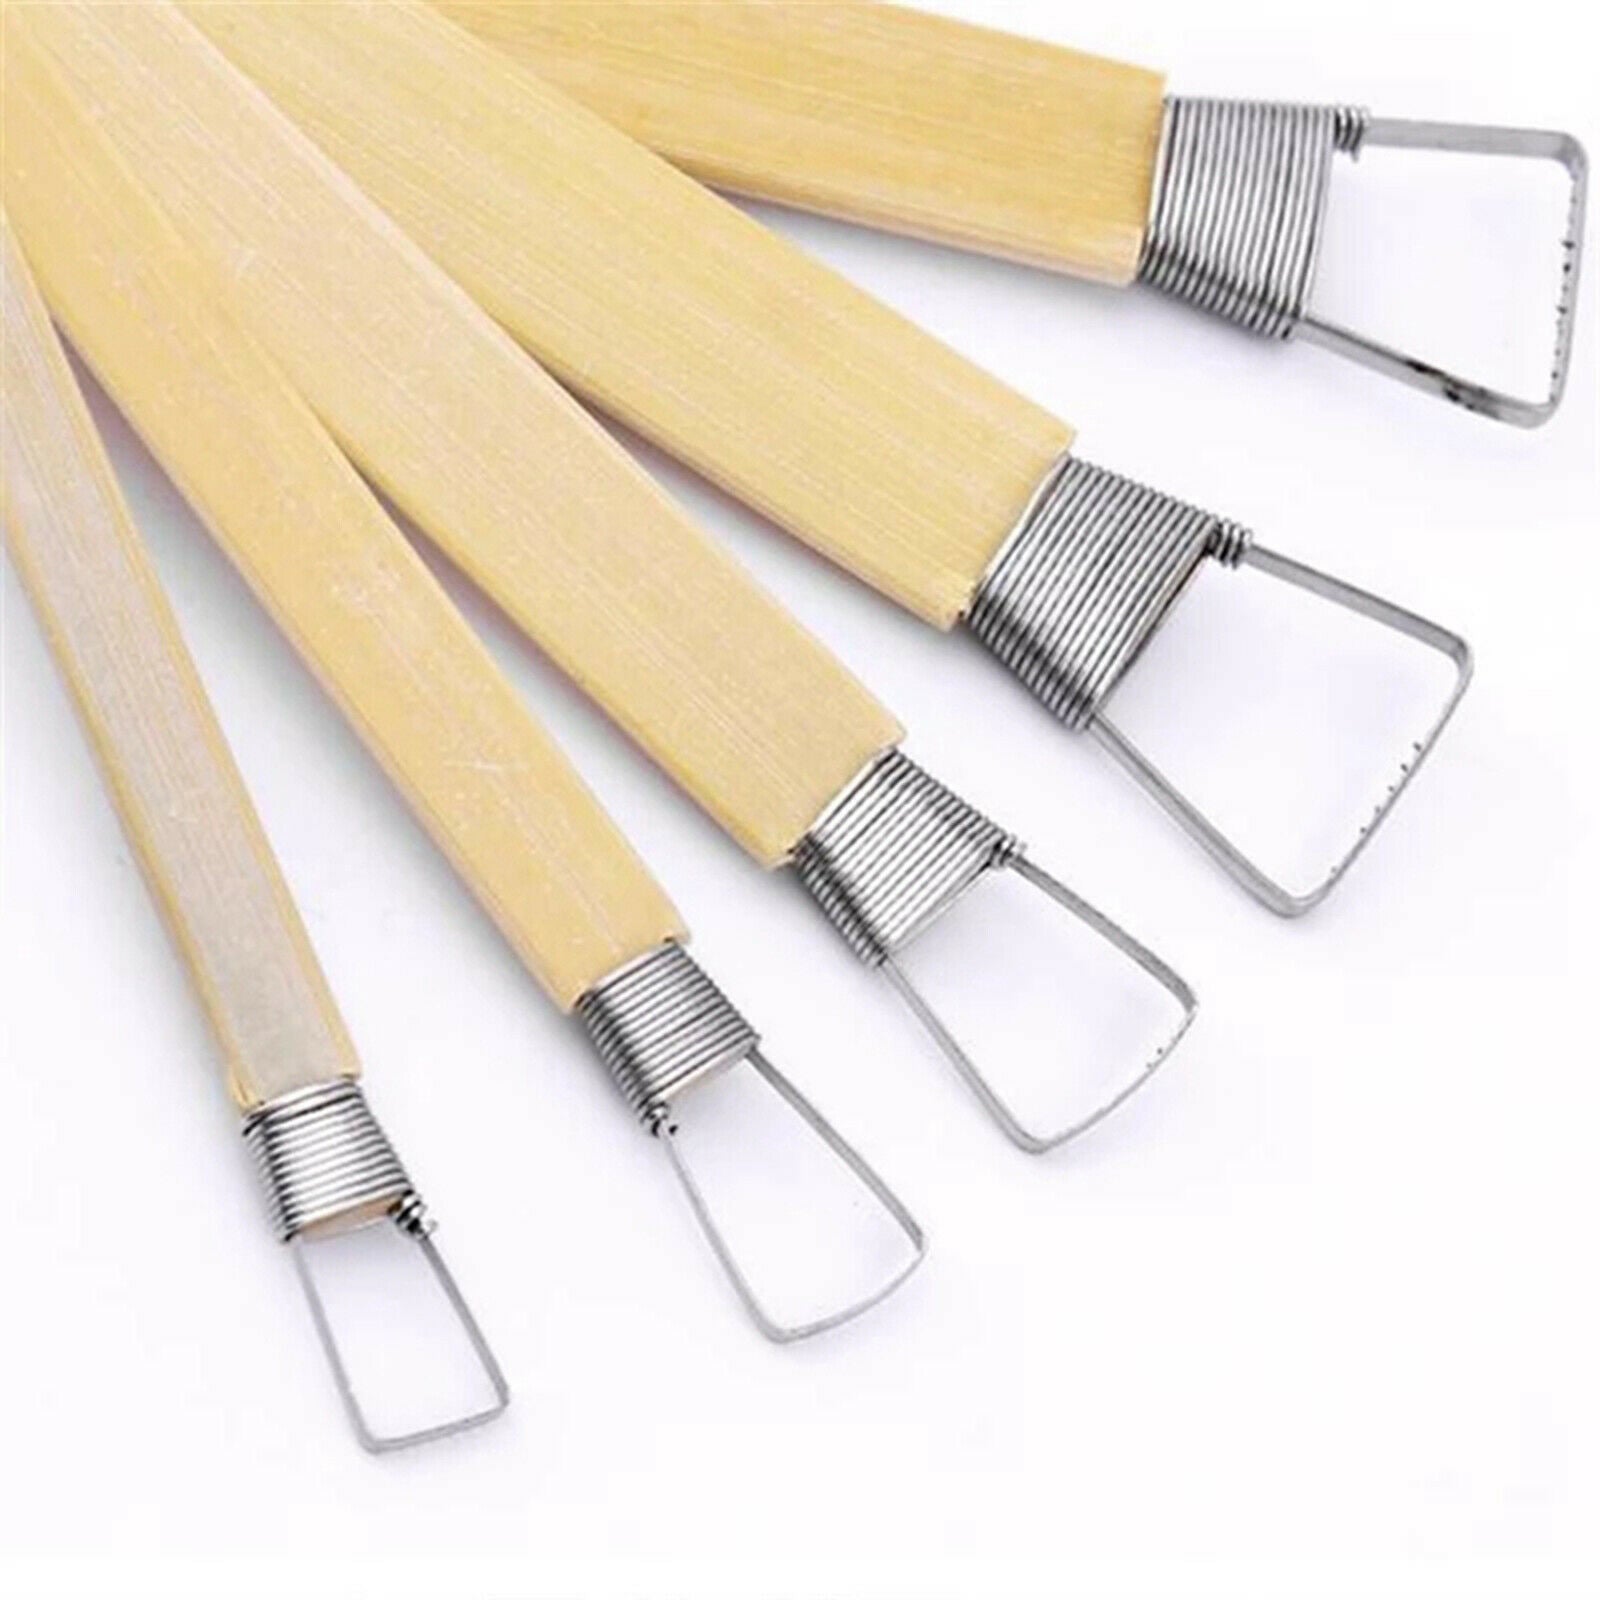 Toothed Clay Pottery Sculpting Tools Scraper Artist Craft Modeling Loop Tool